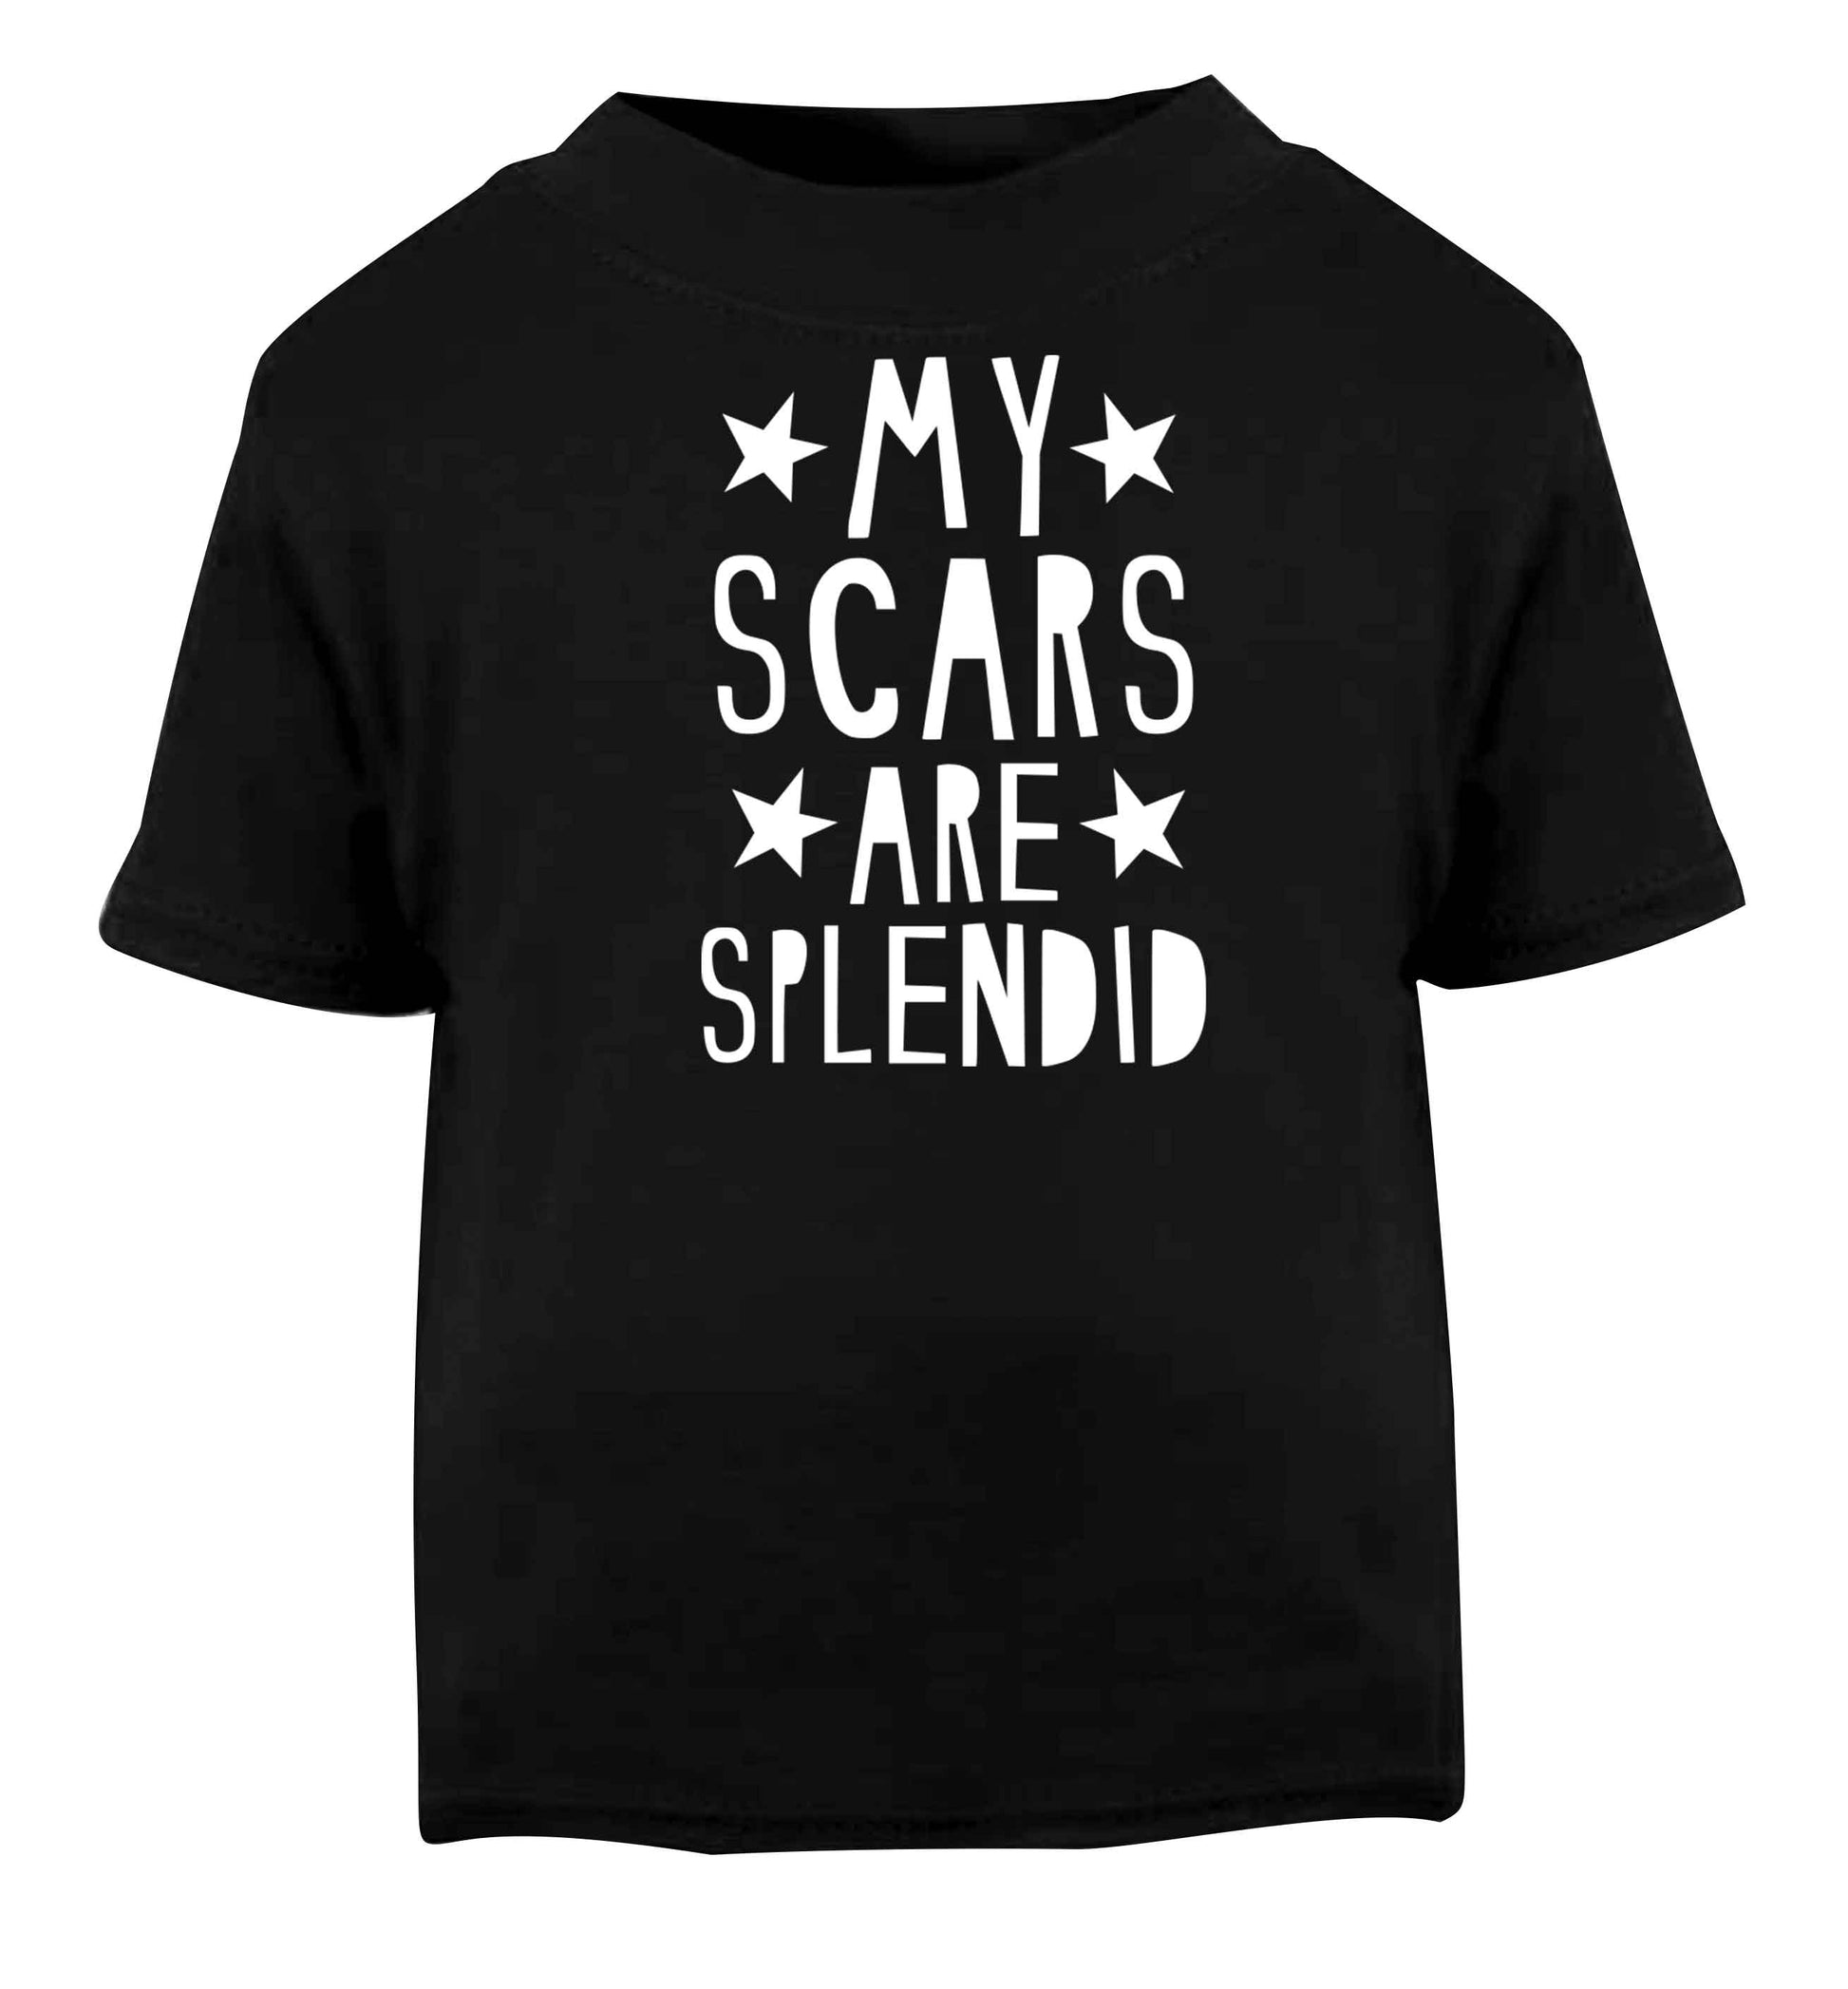 My scars are beautiful Black baby toddler Tshirt 2 years